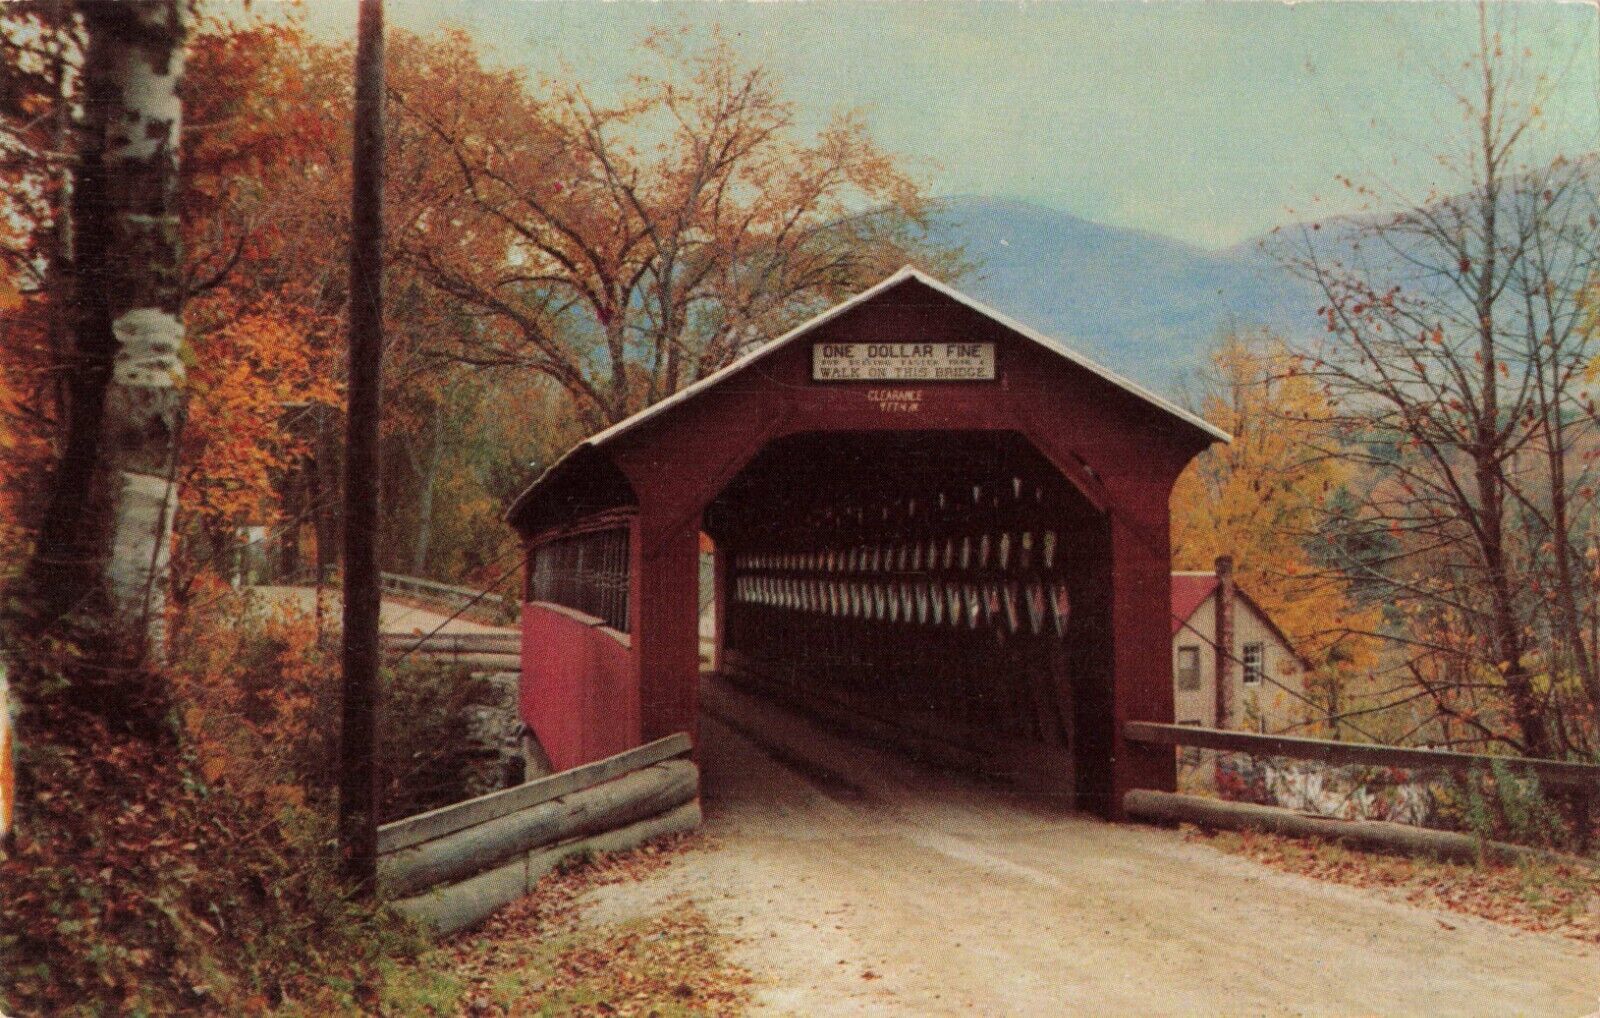 Vermont VT, Small Covered Bridge, Green Mountains, Fall Foliage Vintage Postcard